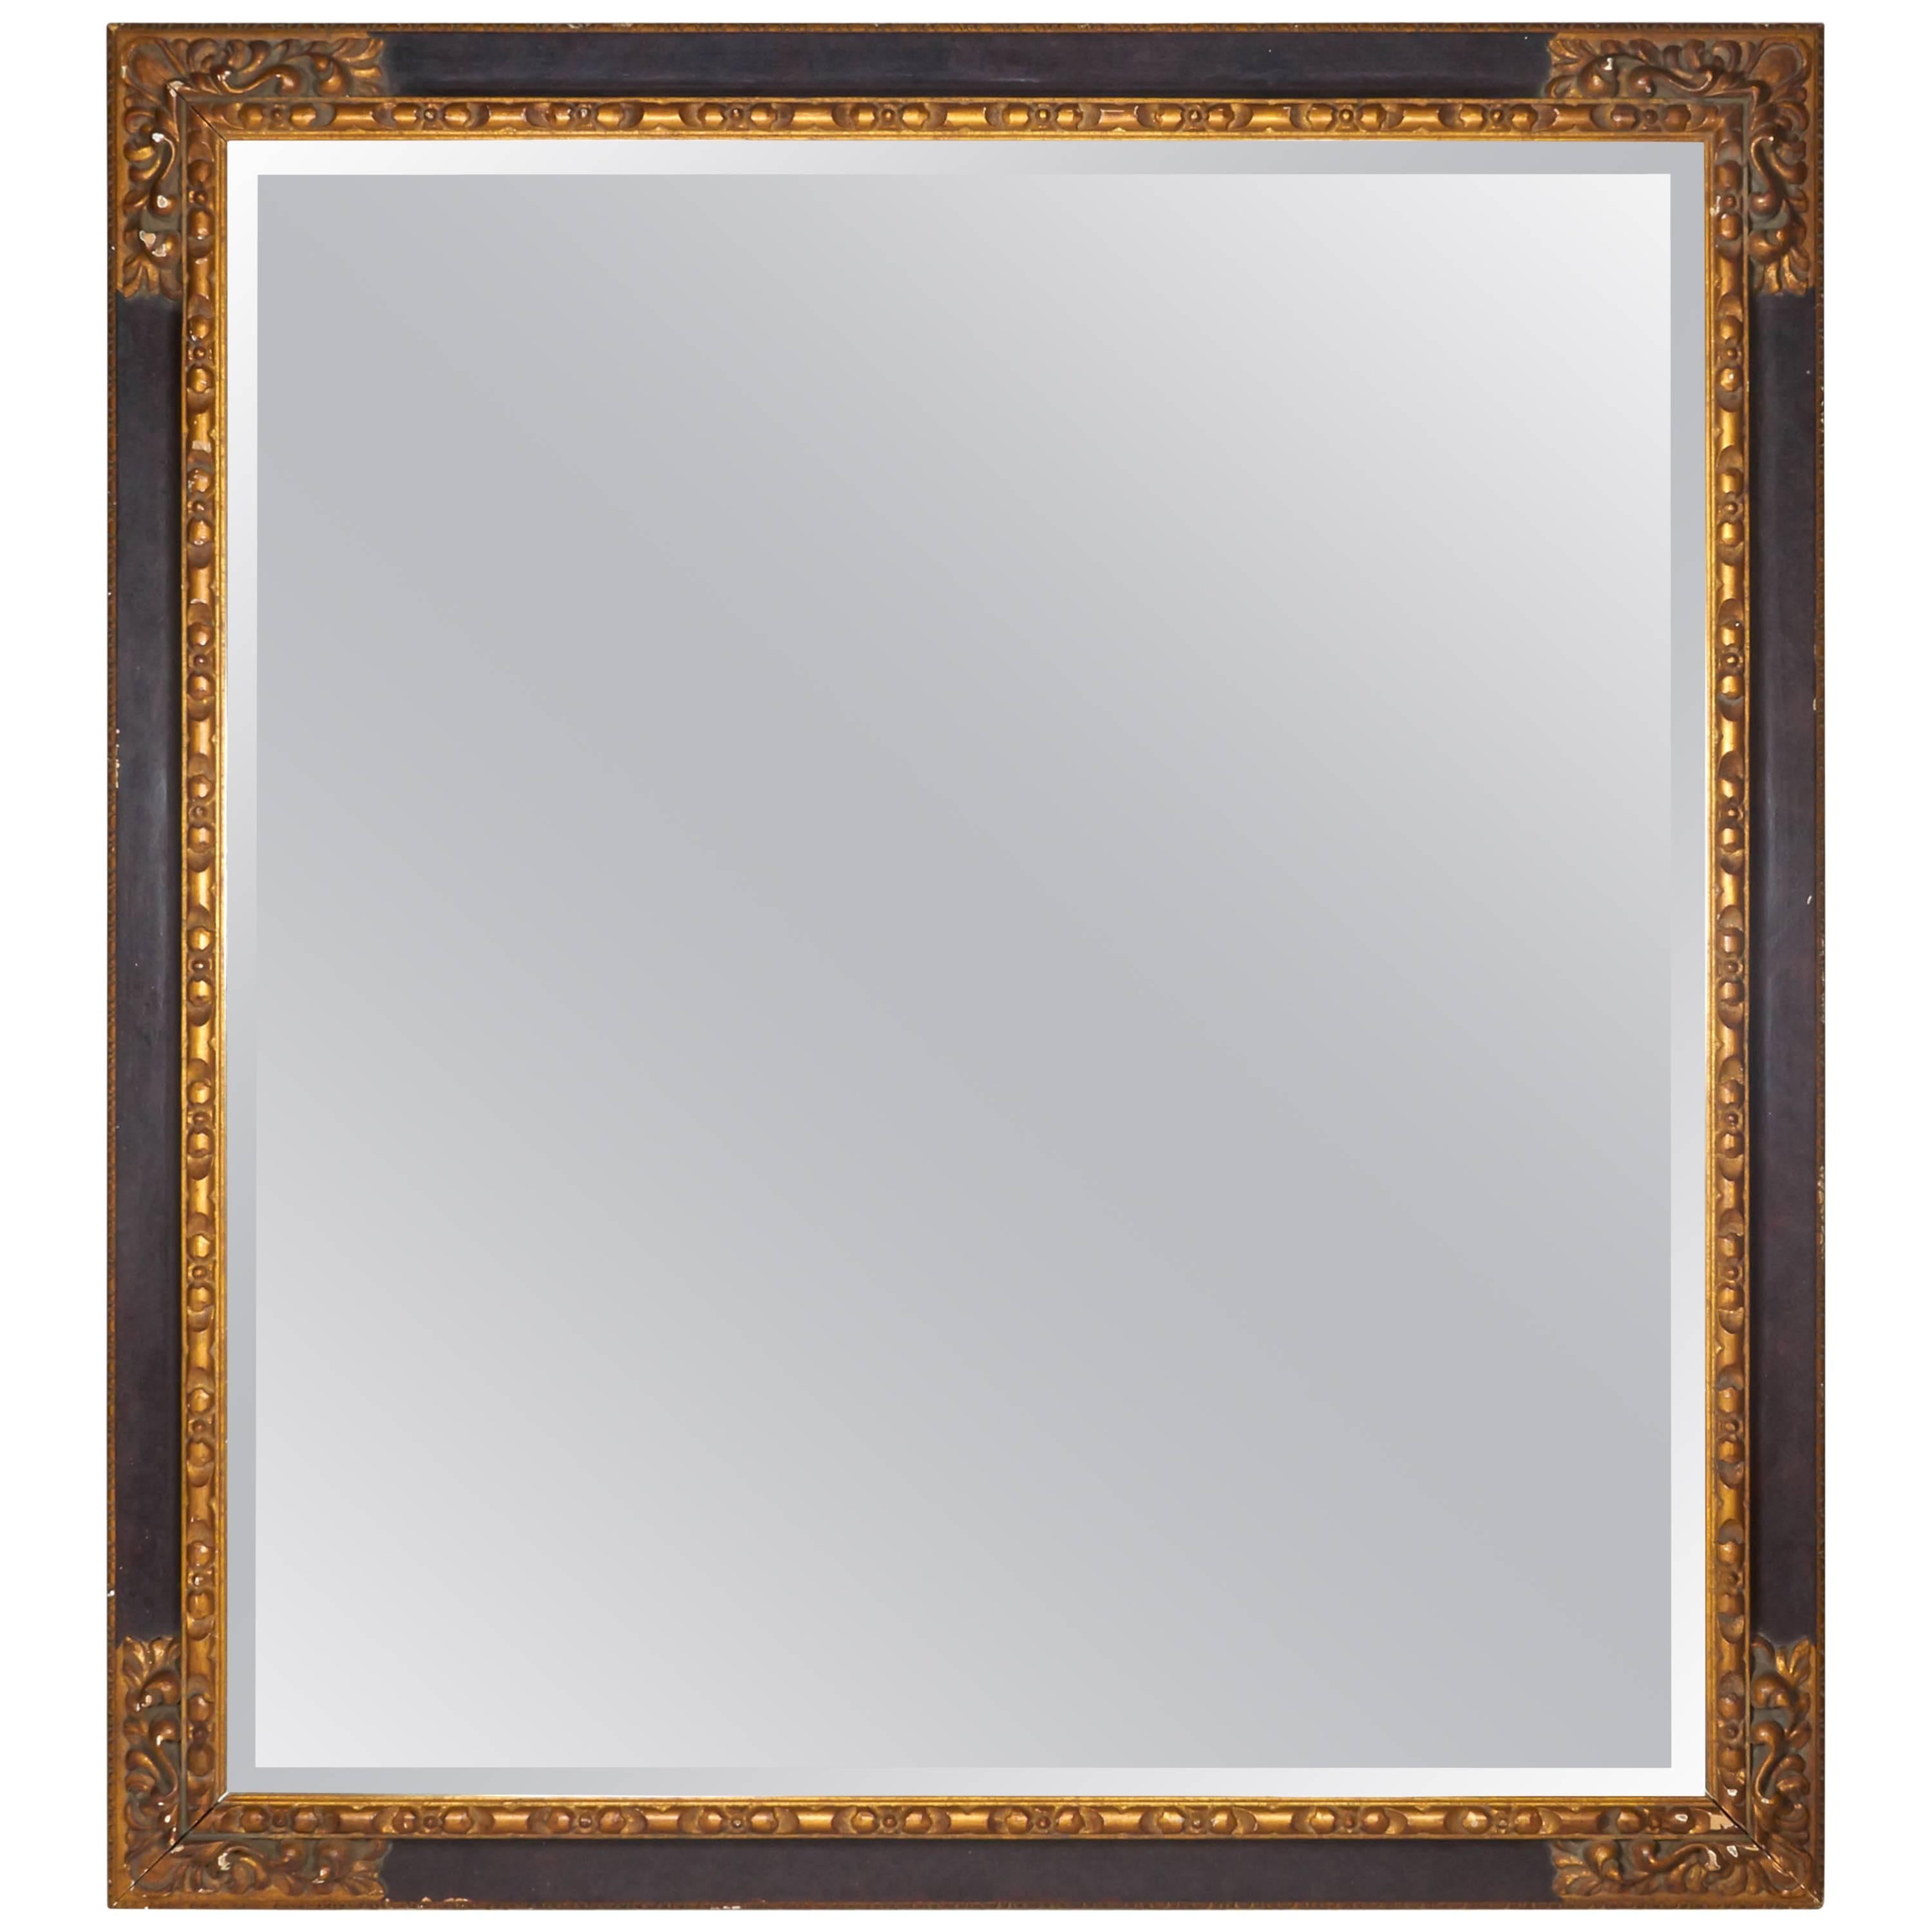 20th Century Antique Ornate Wood Frame Wall Mirror For Sale